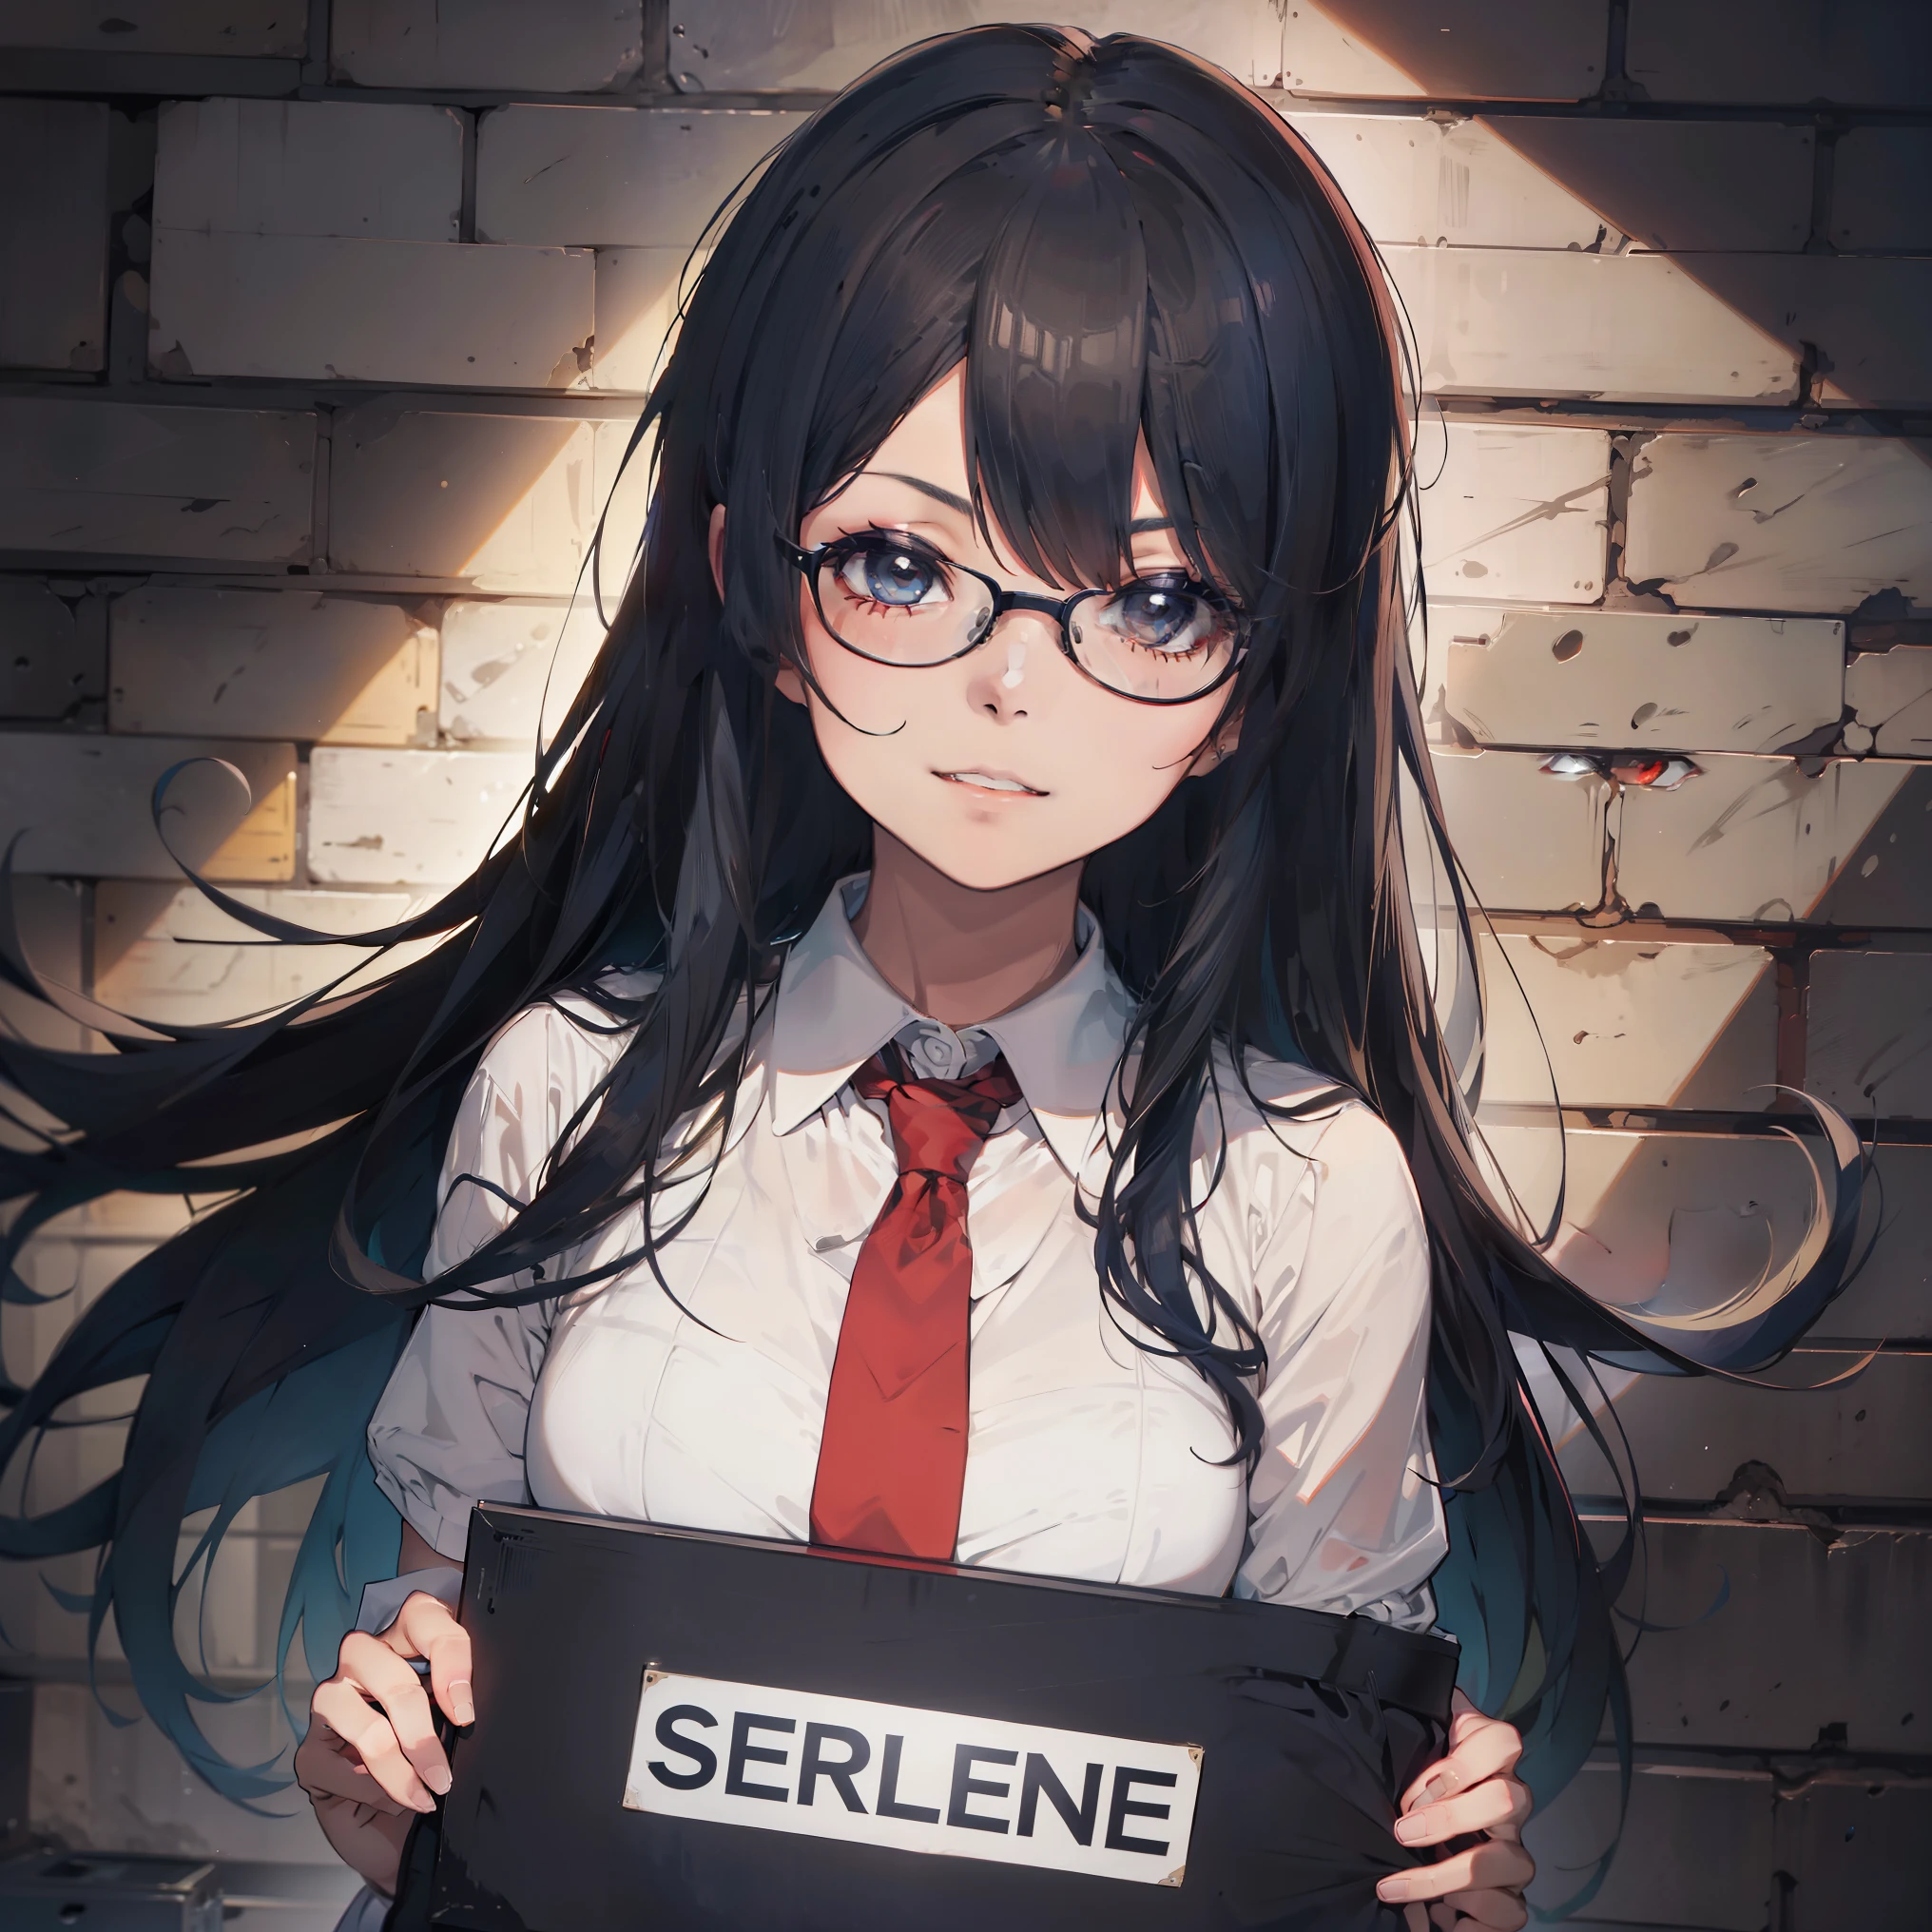 masterpiece, better quality, dynamic light, woman, black long hair, red rimmed glasses, navy blue work clothes, rebellious look, Pose from the front, Holding a sign in hand, detailed background, height graphic background